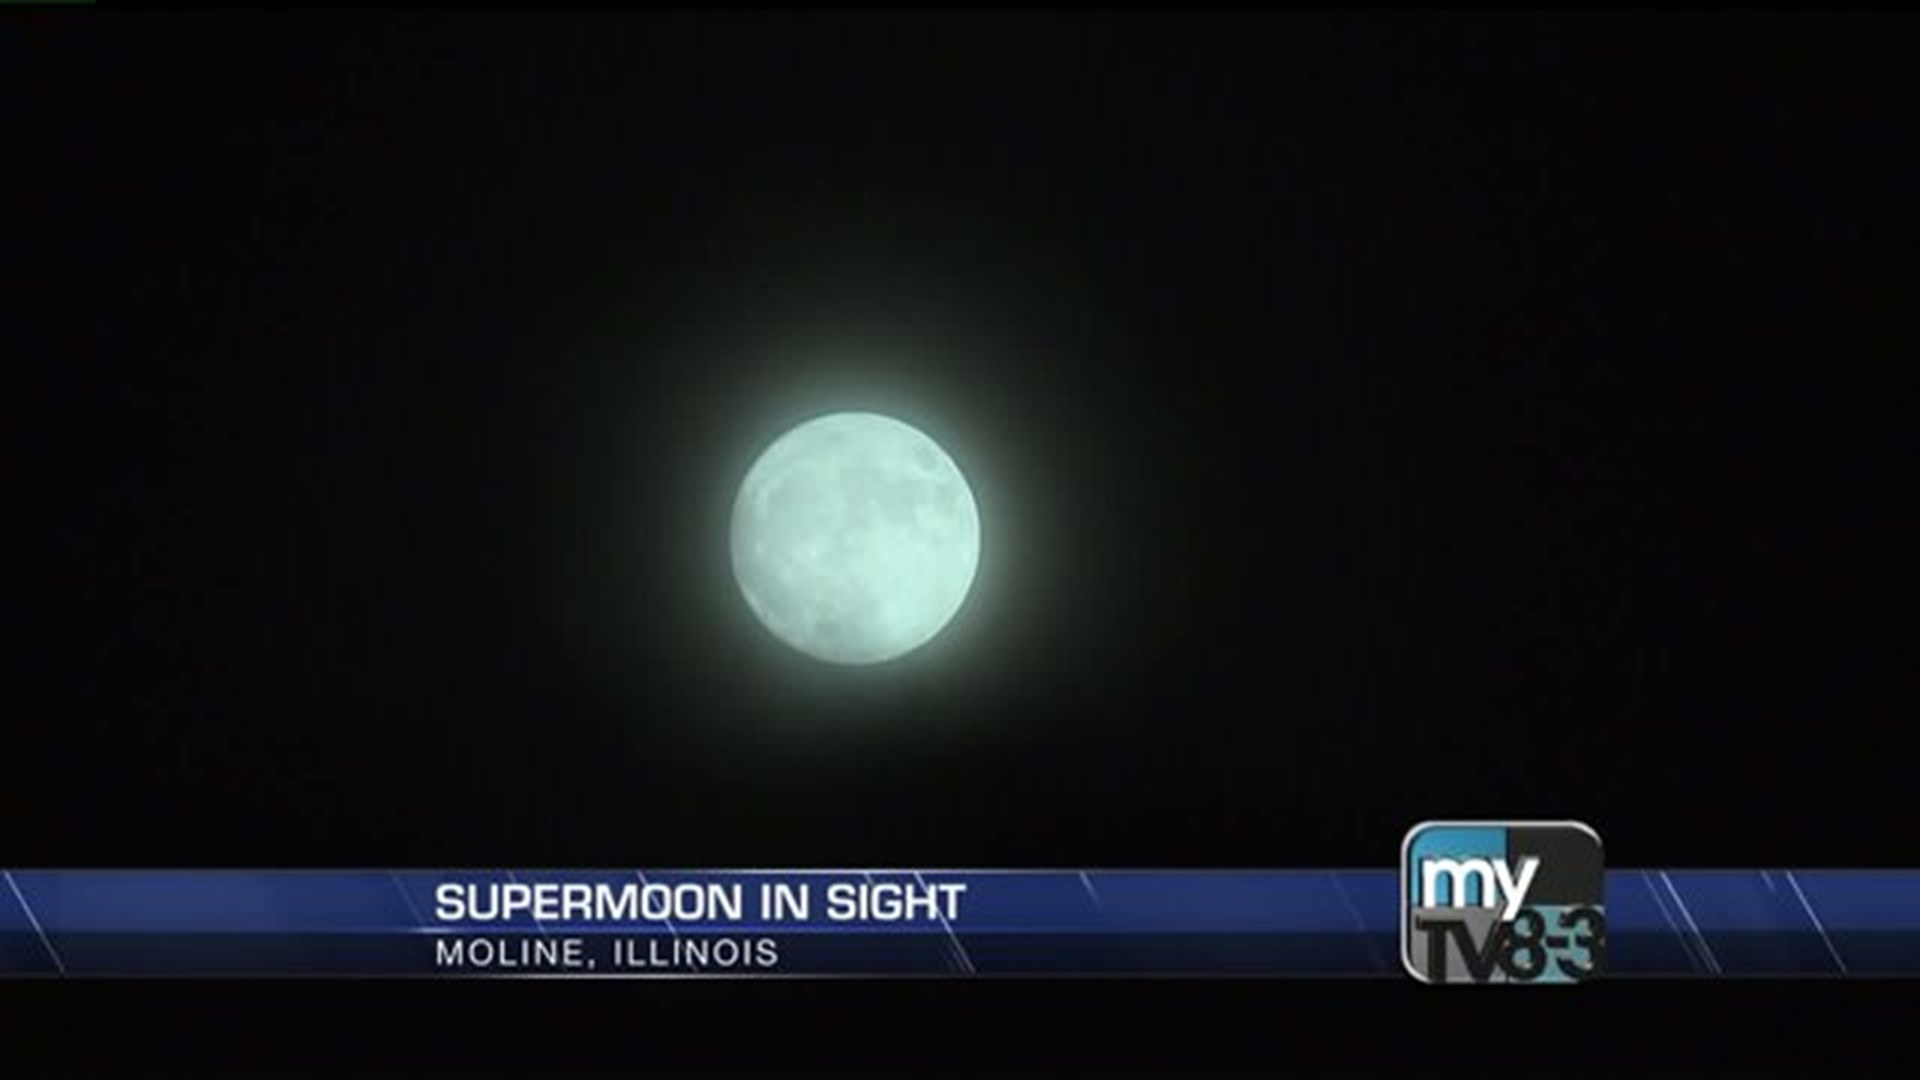 Popular Astronomy Club checks out the supermoon